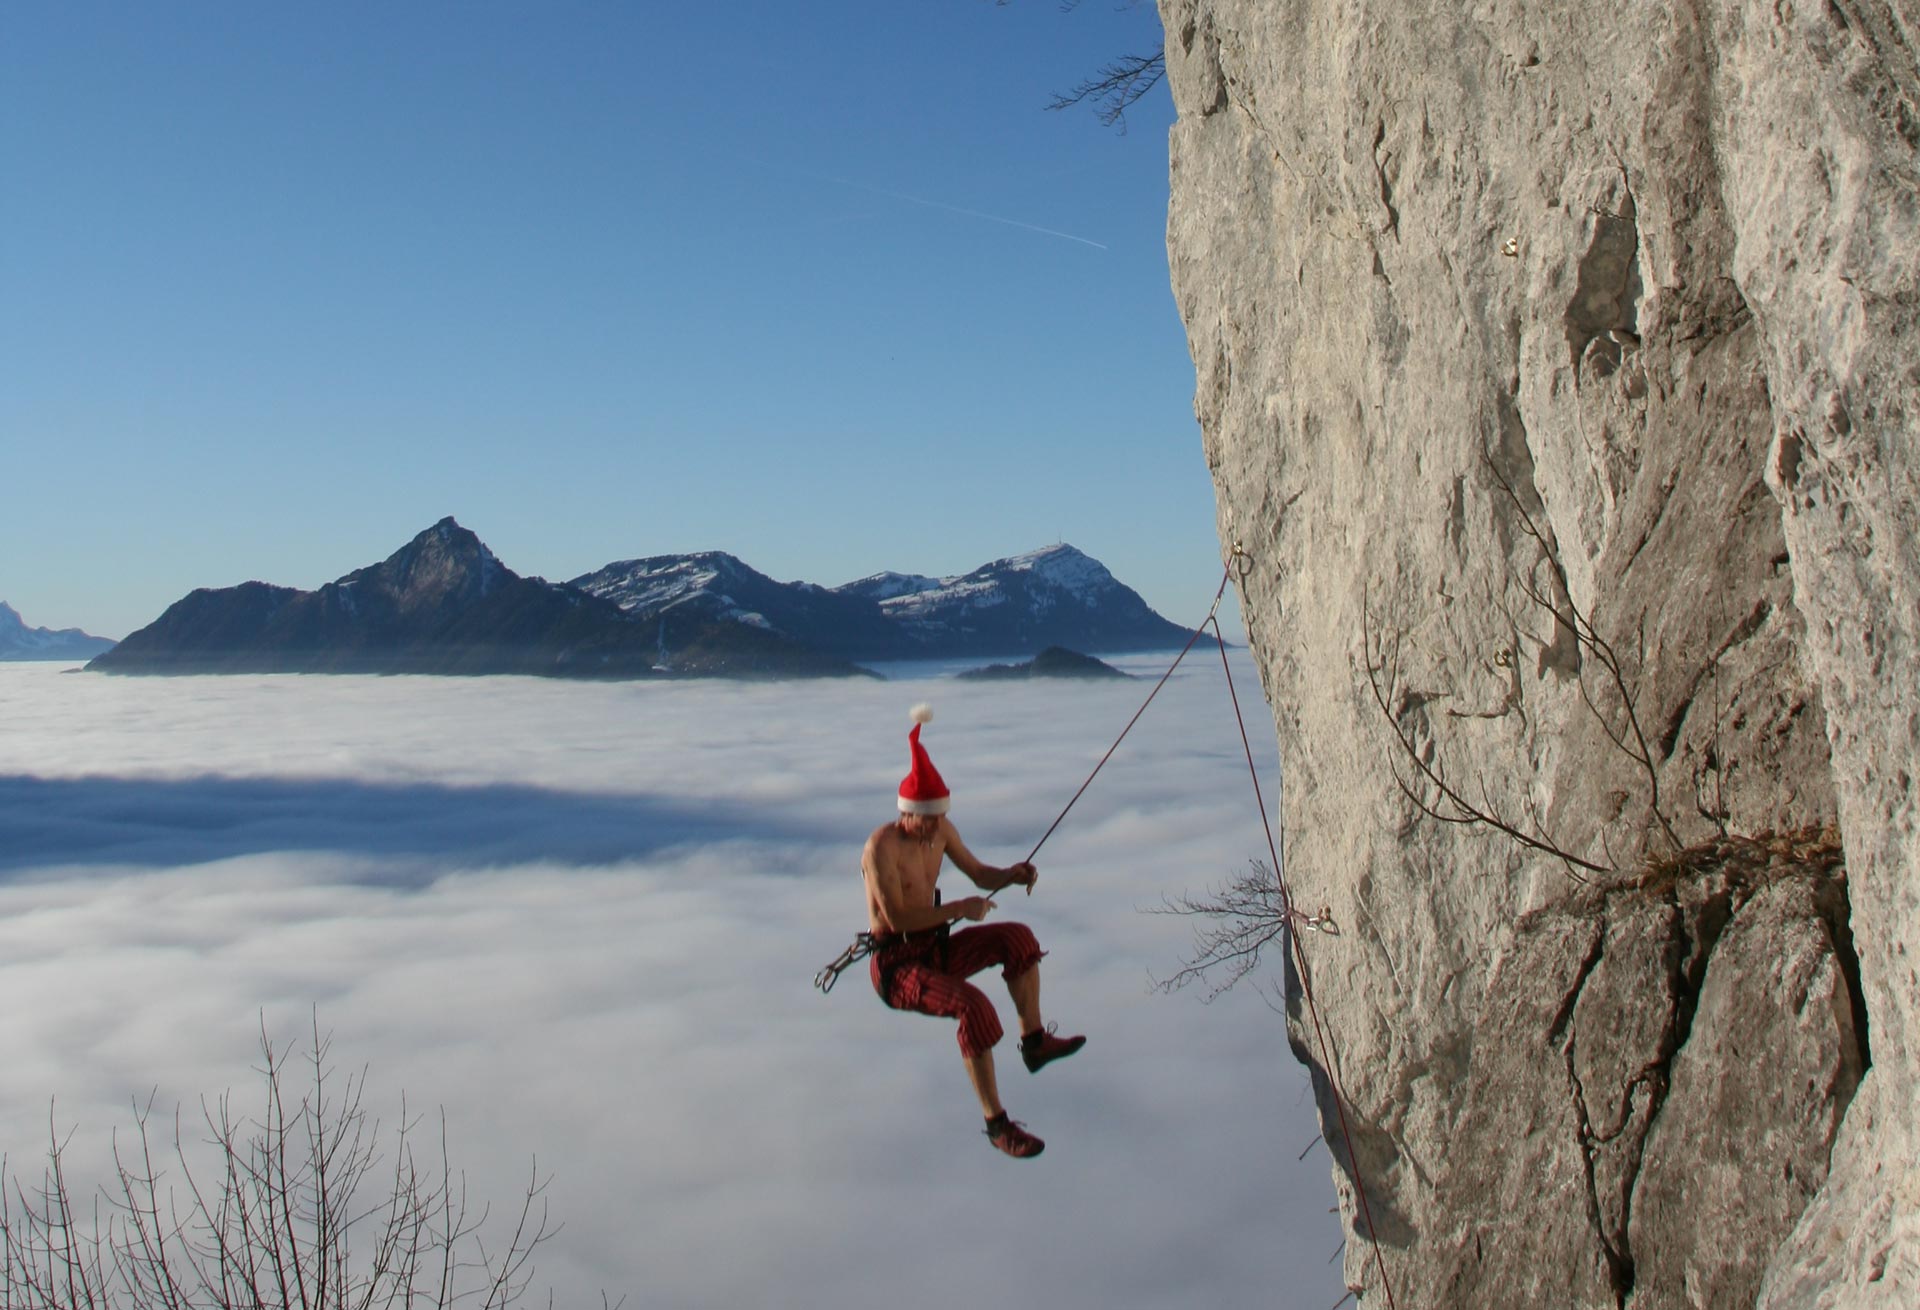 The Beauty of freaks: A special business model of chefs and mountain guides